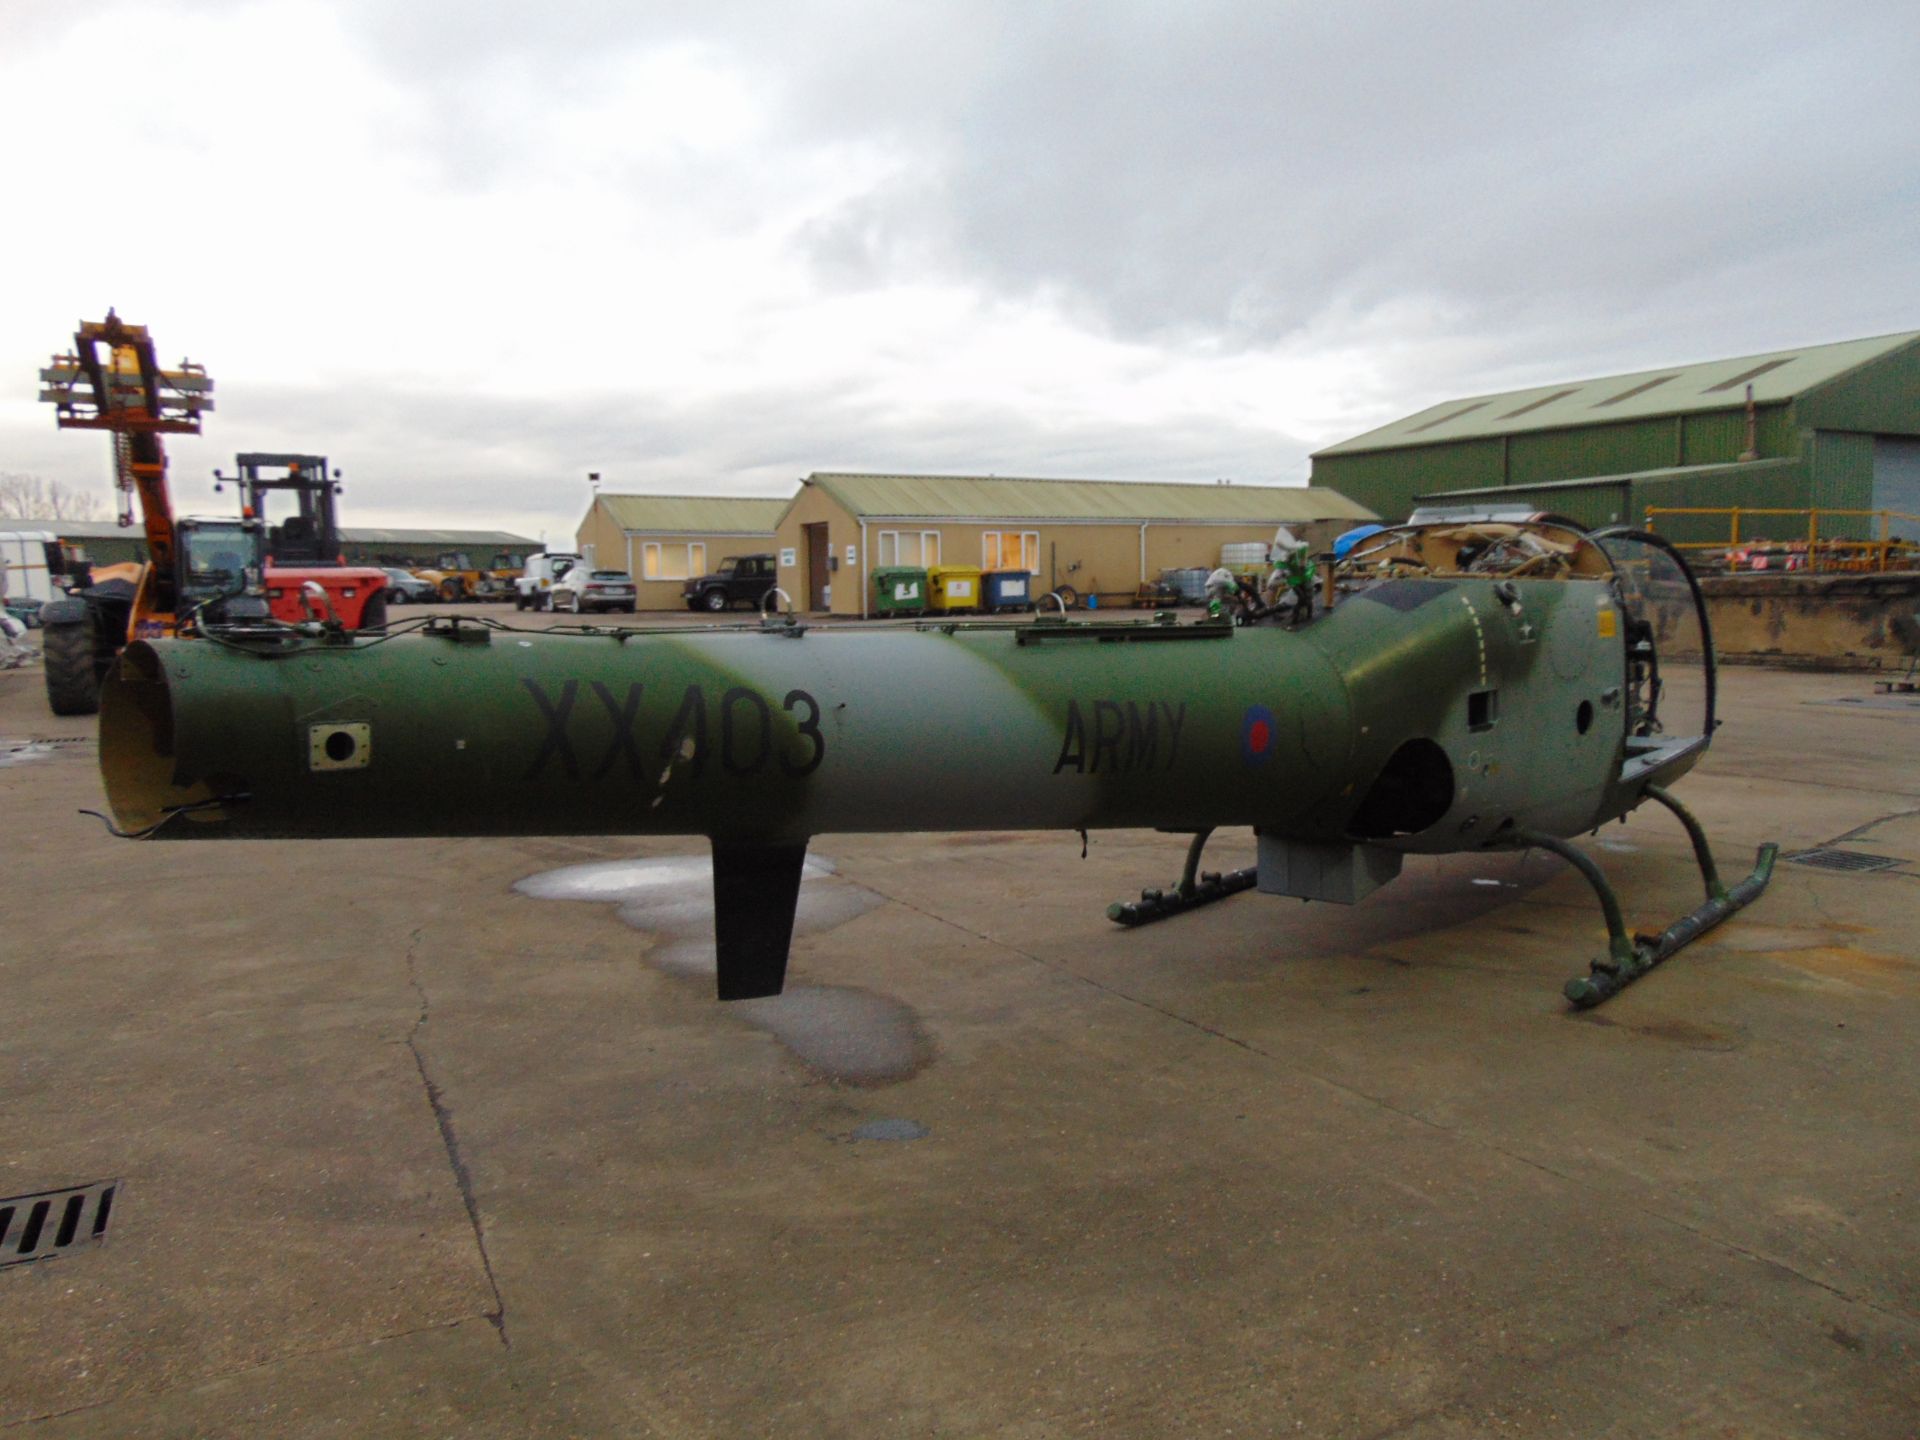 Gazelle AH 1 Turbine Helicopter Airframe (TAIL NUMBER XX403) - Image 7 of 28